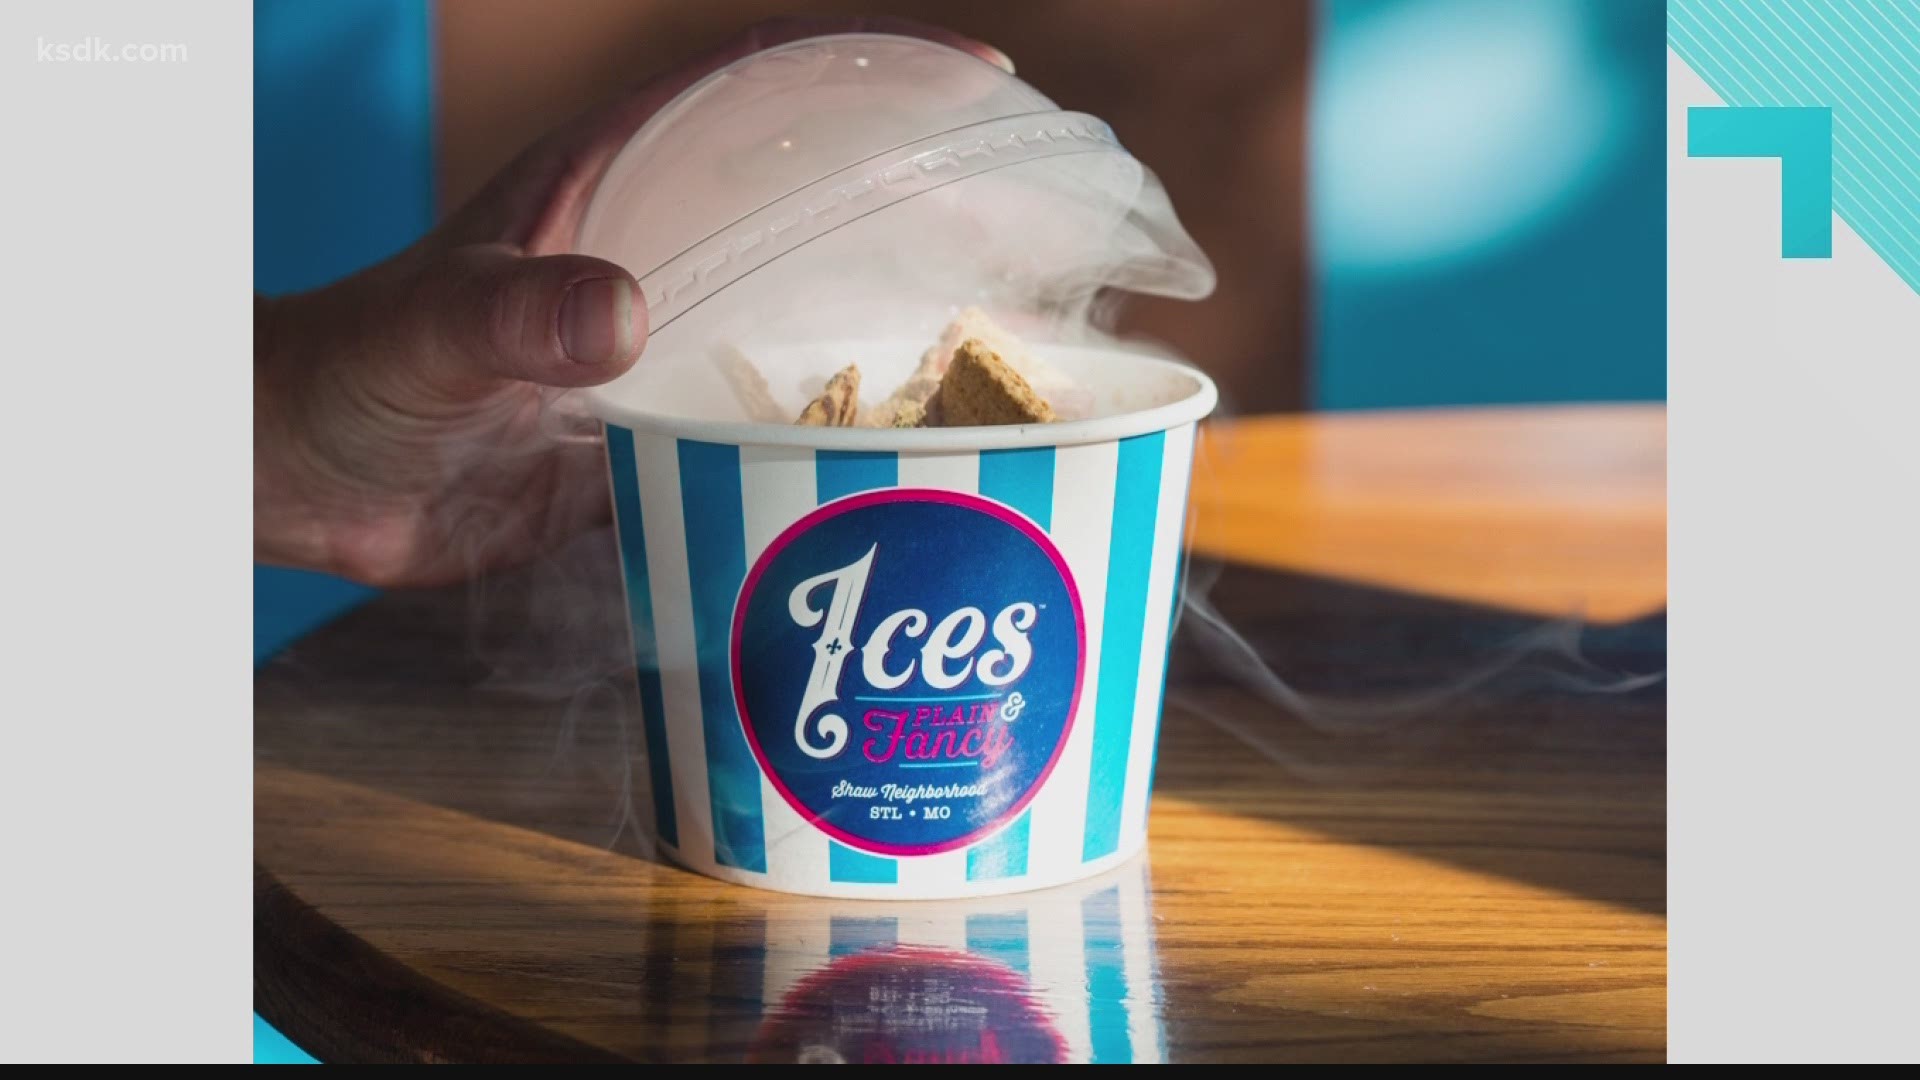 Since opening in 2014, Ices Plain & Fancy has been known for its made-to-order nitro ice cream.